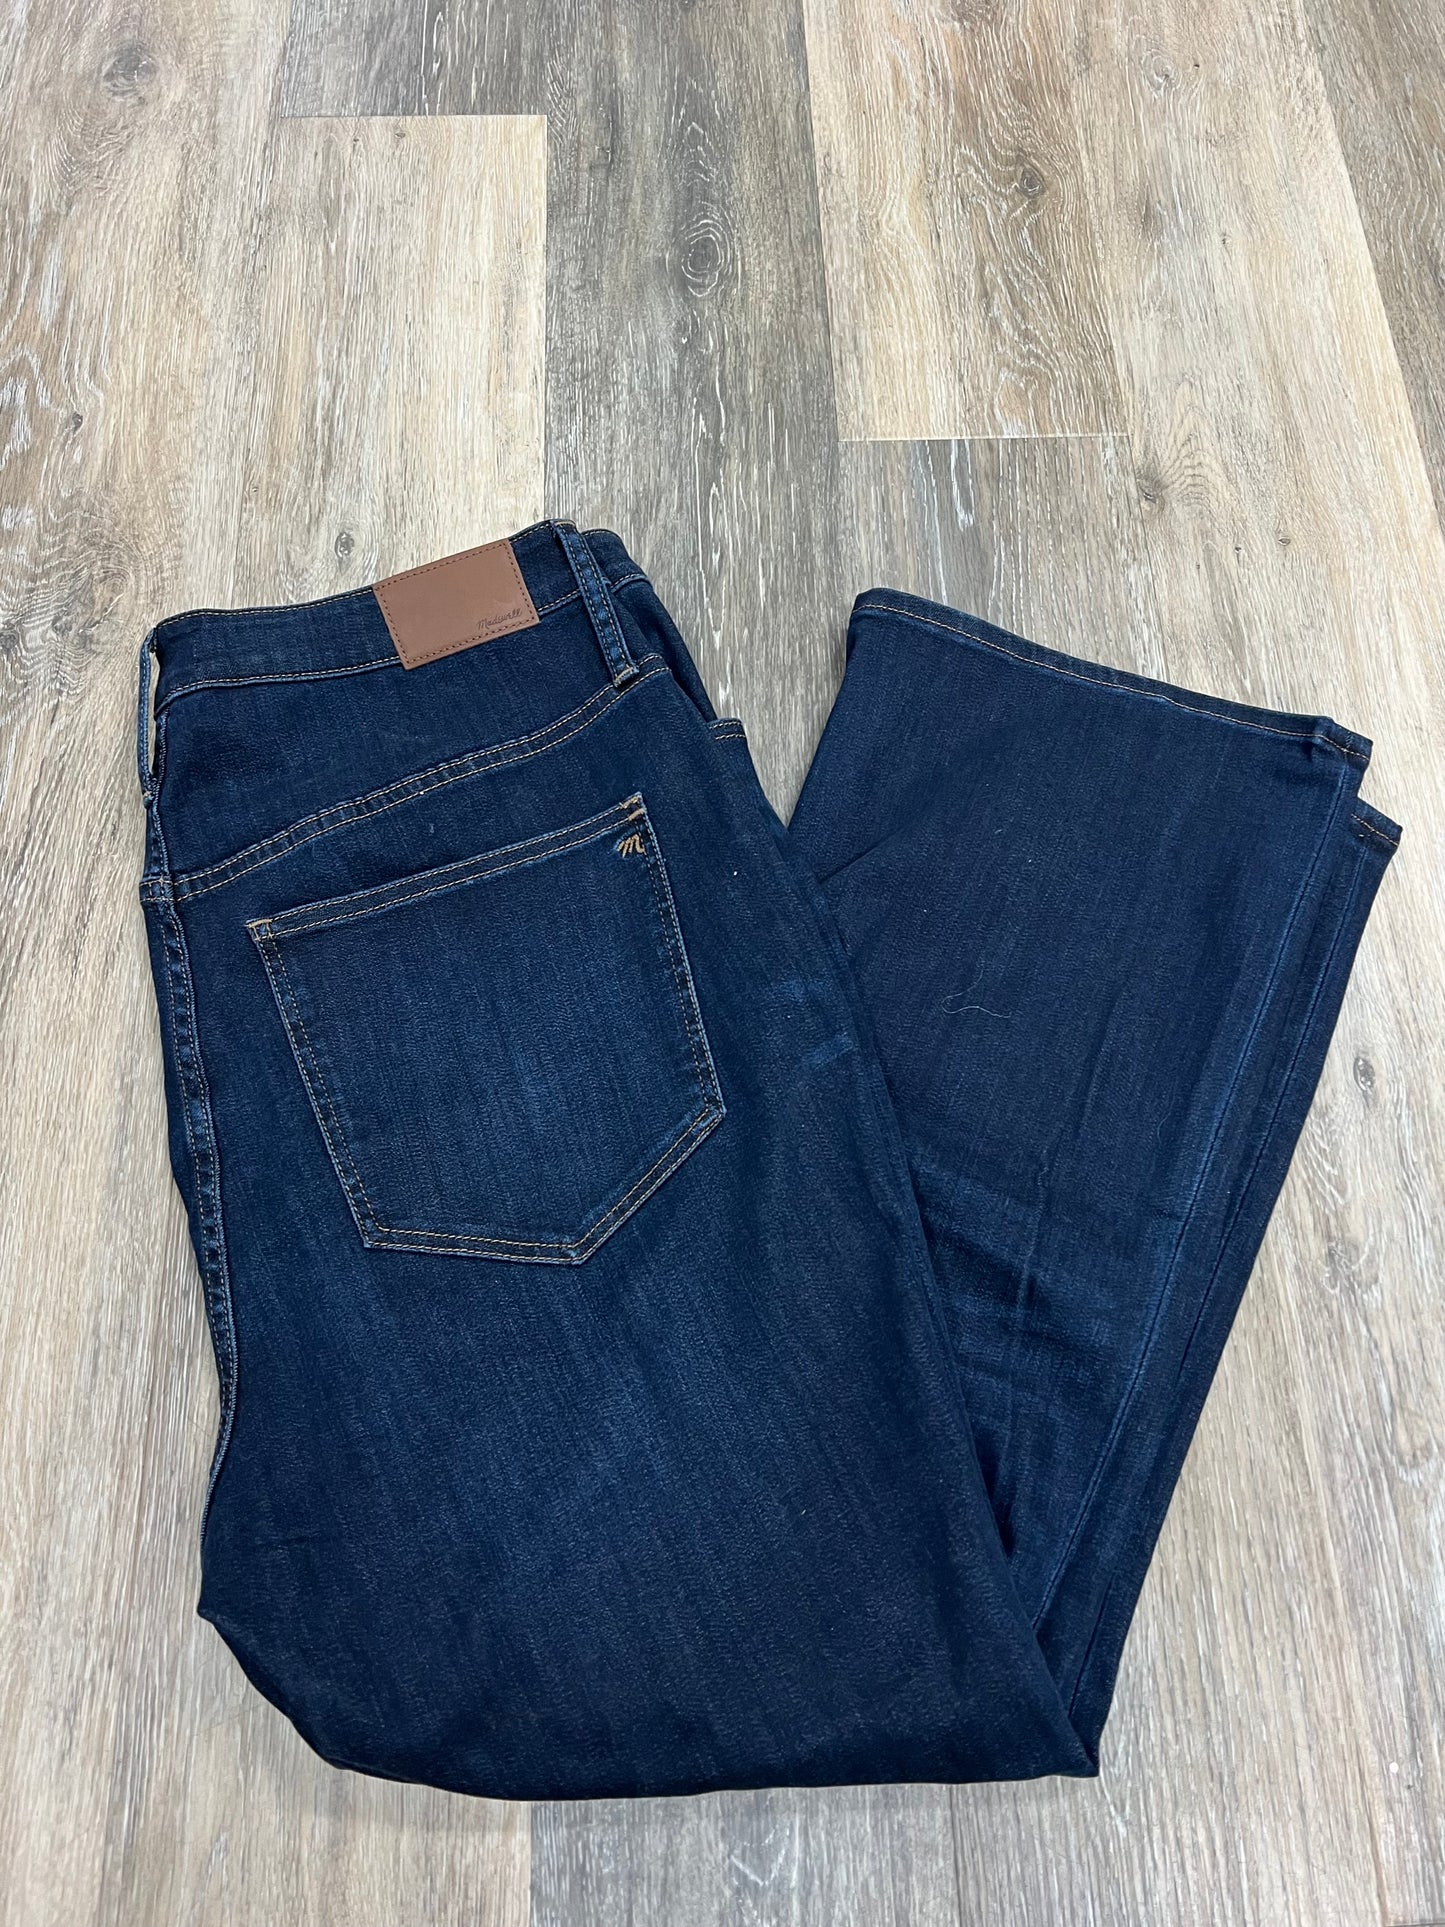 Jeans Boot Cut By Madewell  Size: 15/33